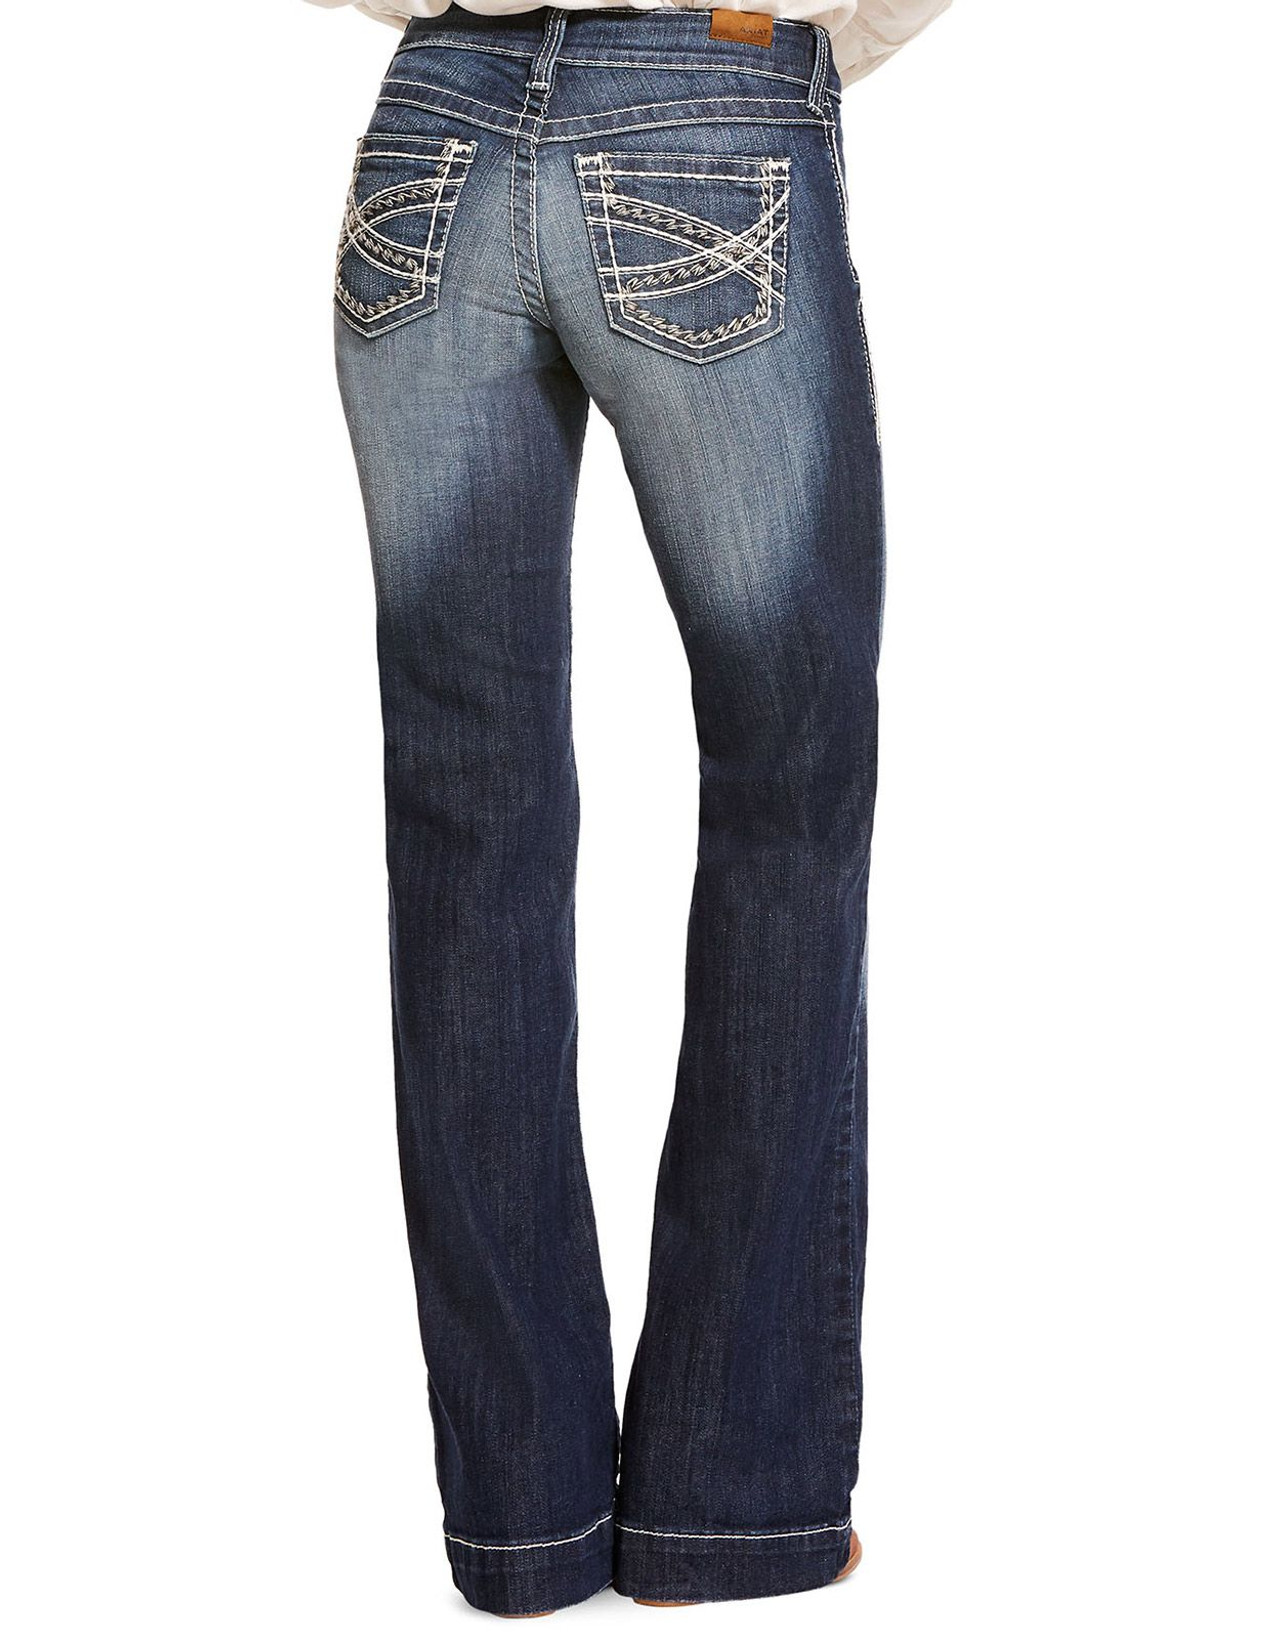 Ariat Women's R.E.A.L. Trouser Jeans from Langston's